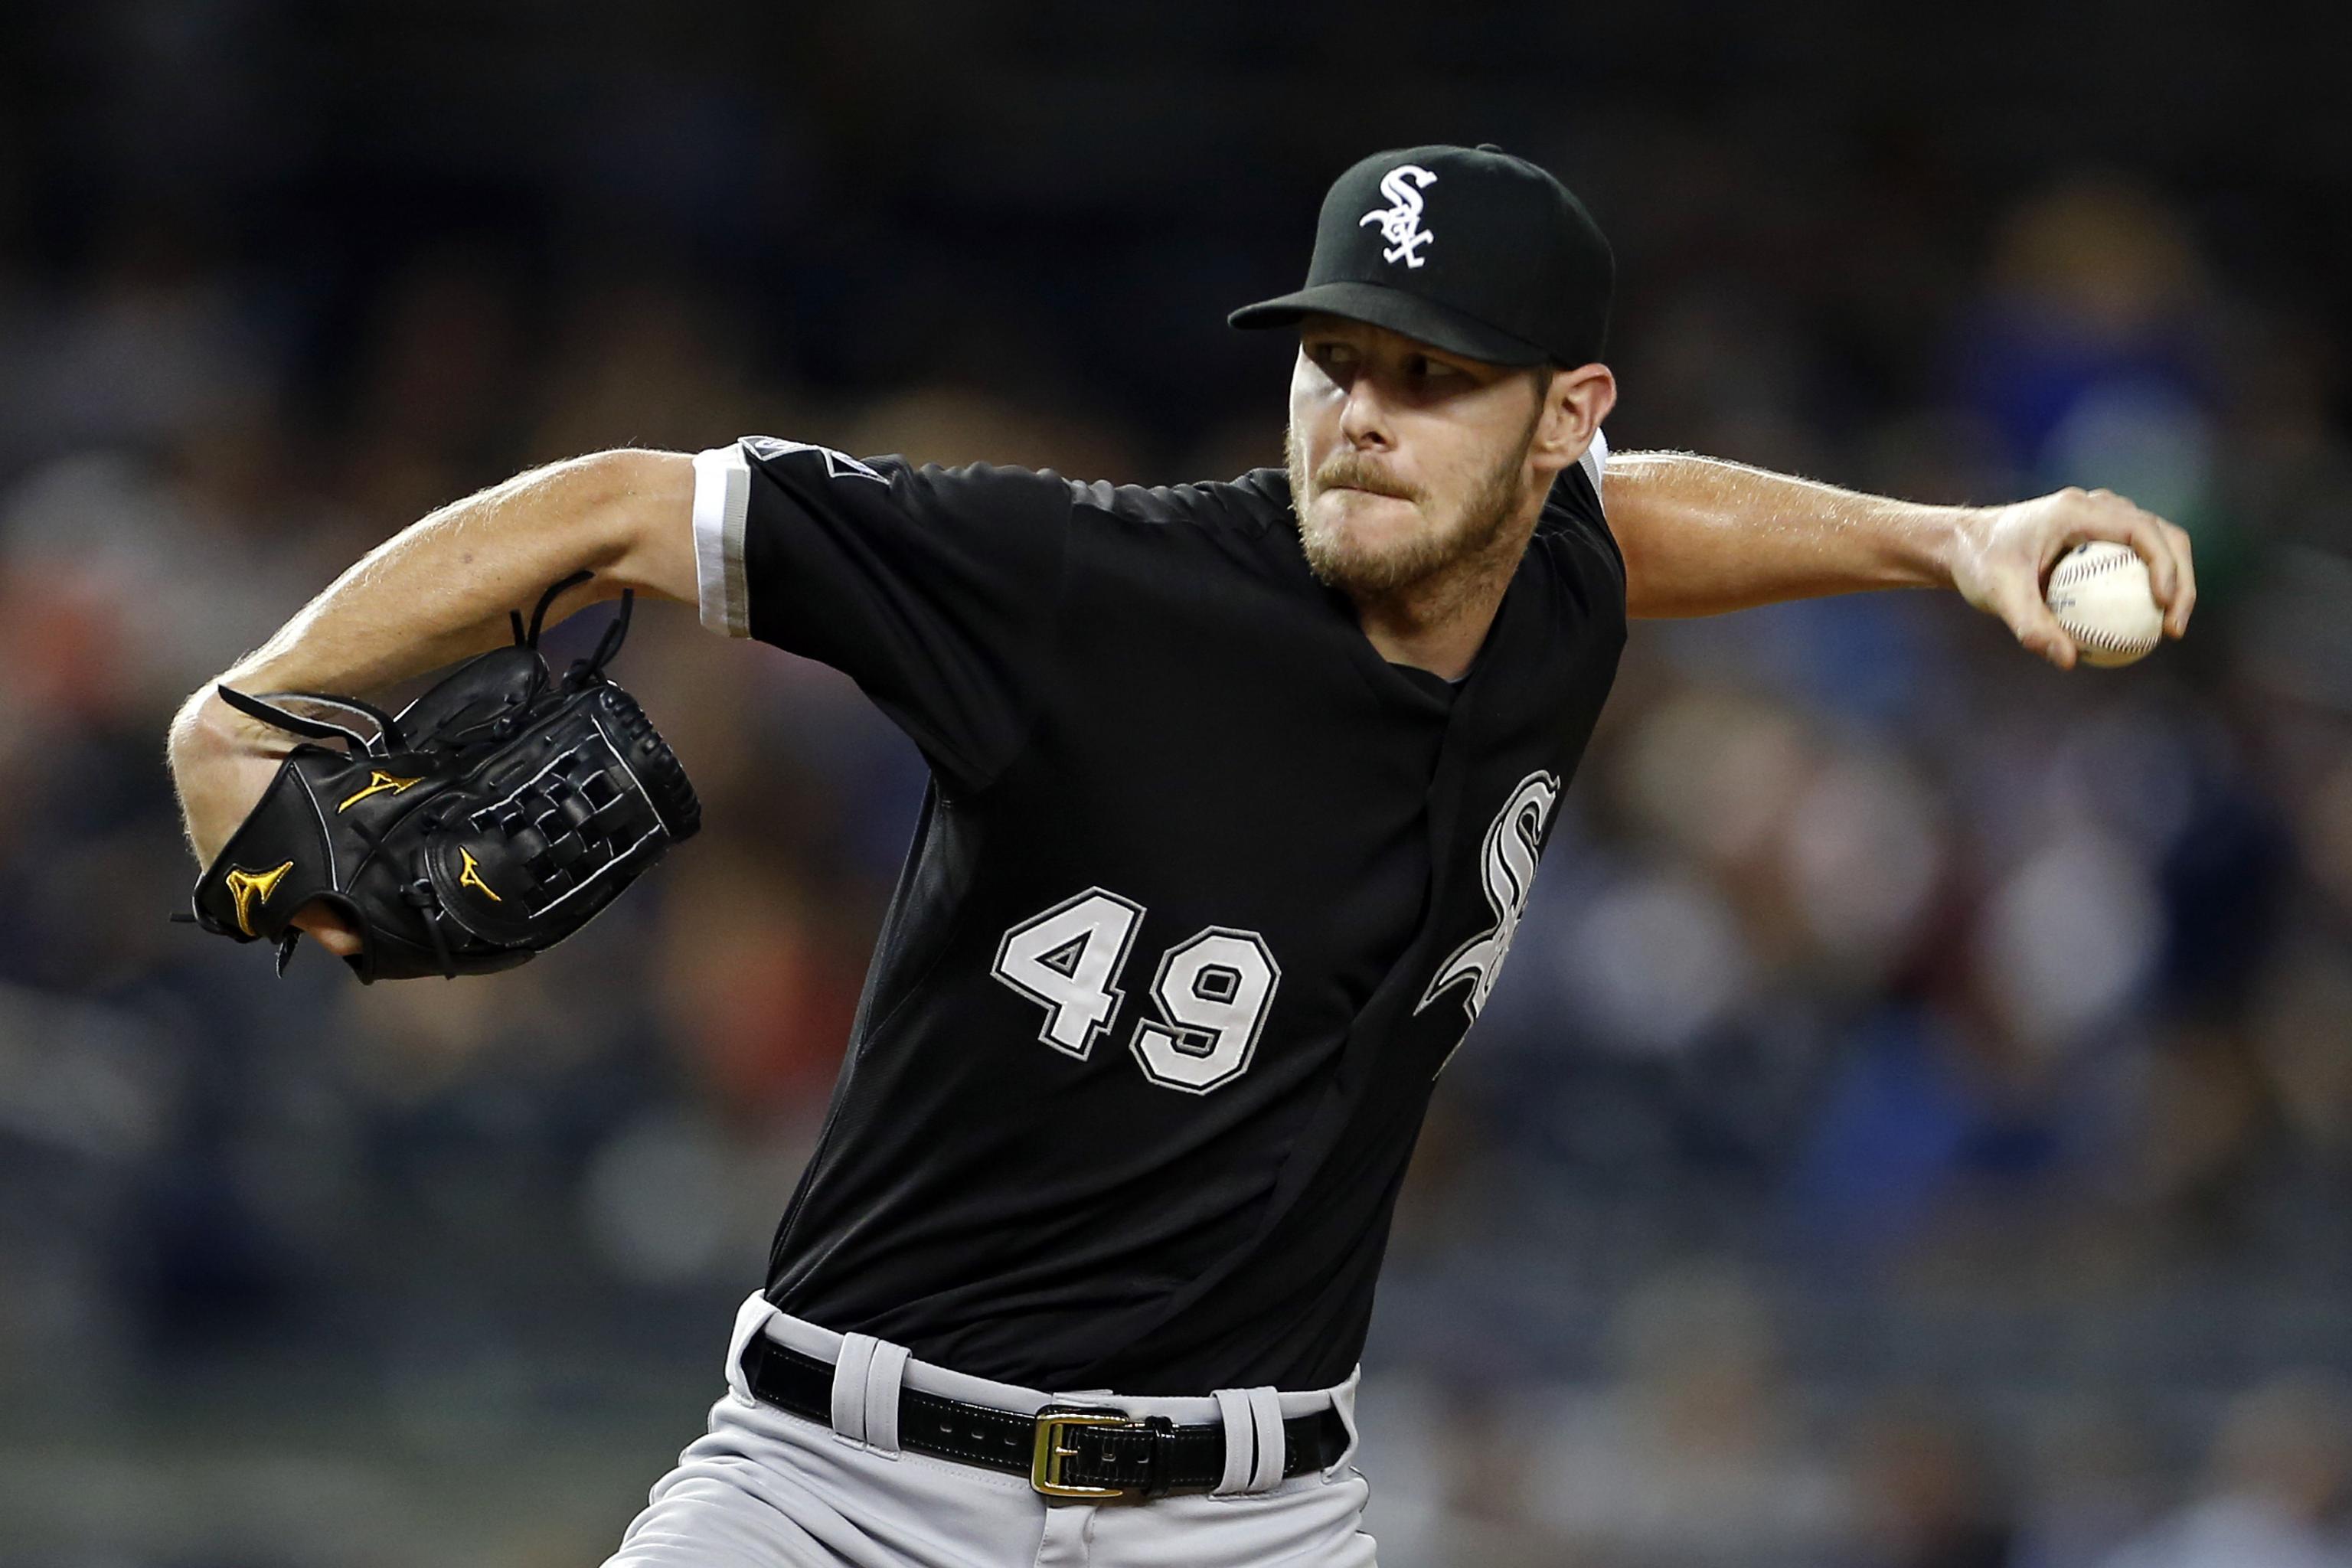 White Sox pitcher Chris Sale's skinny stature and lasting career